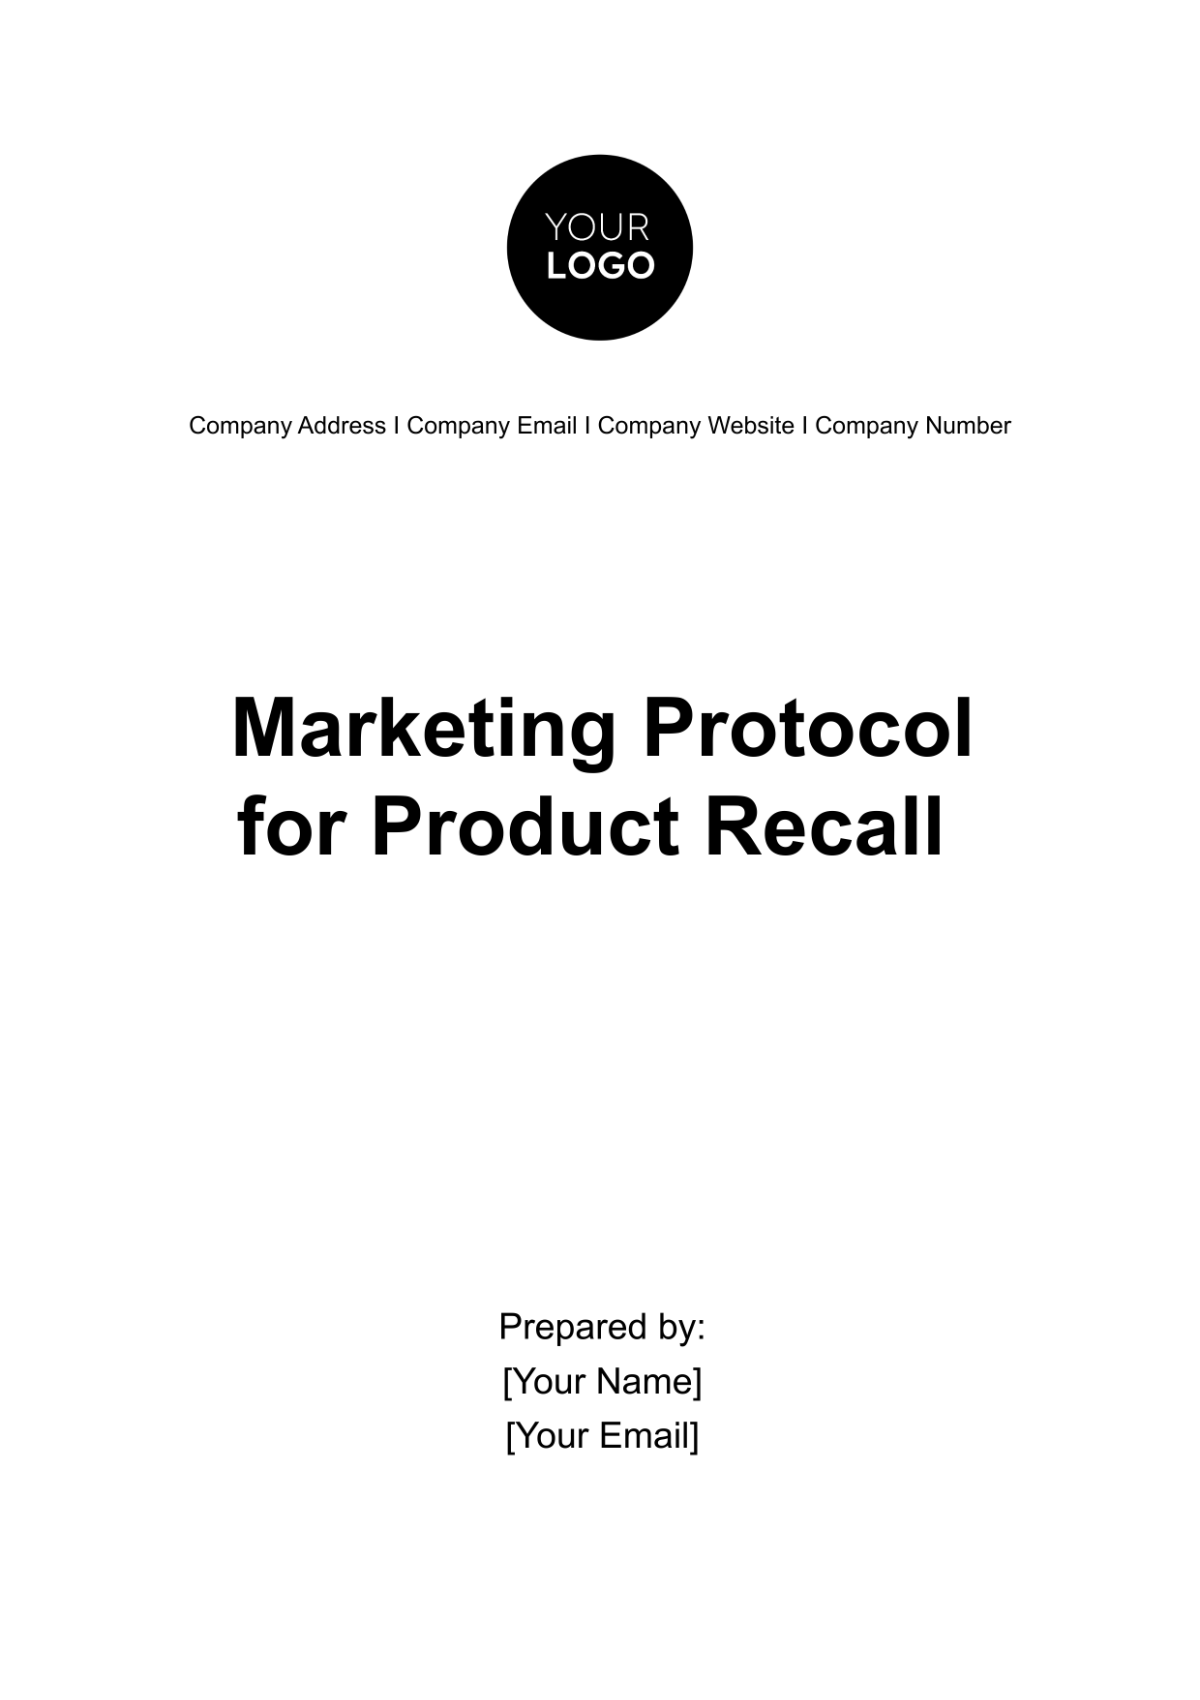 Marketing Protocol for Product Recall Template